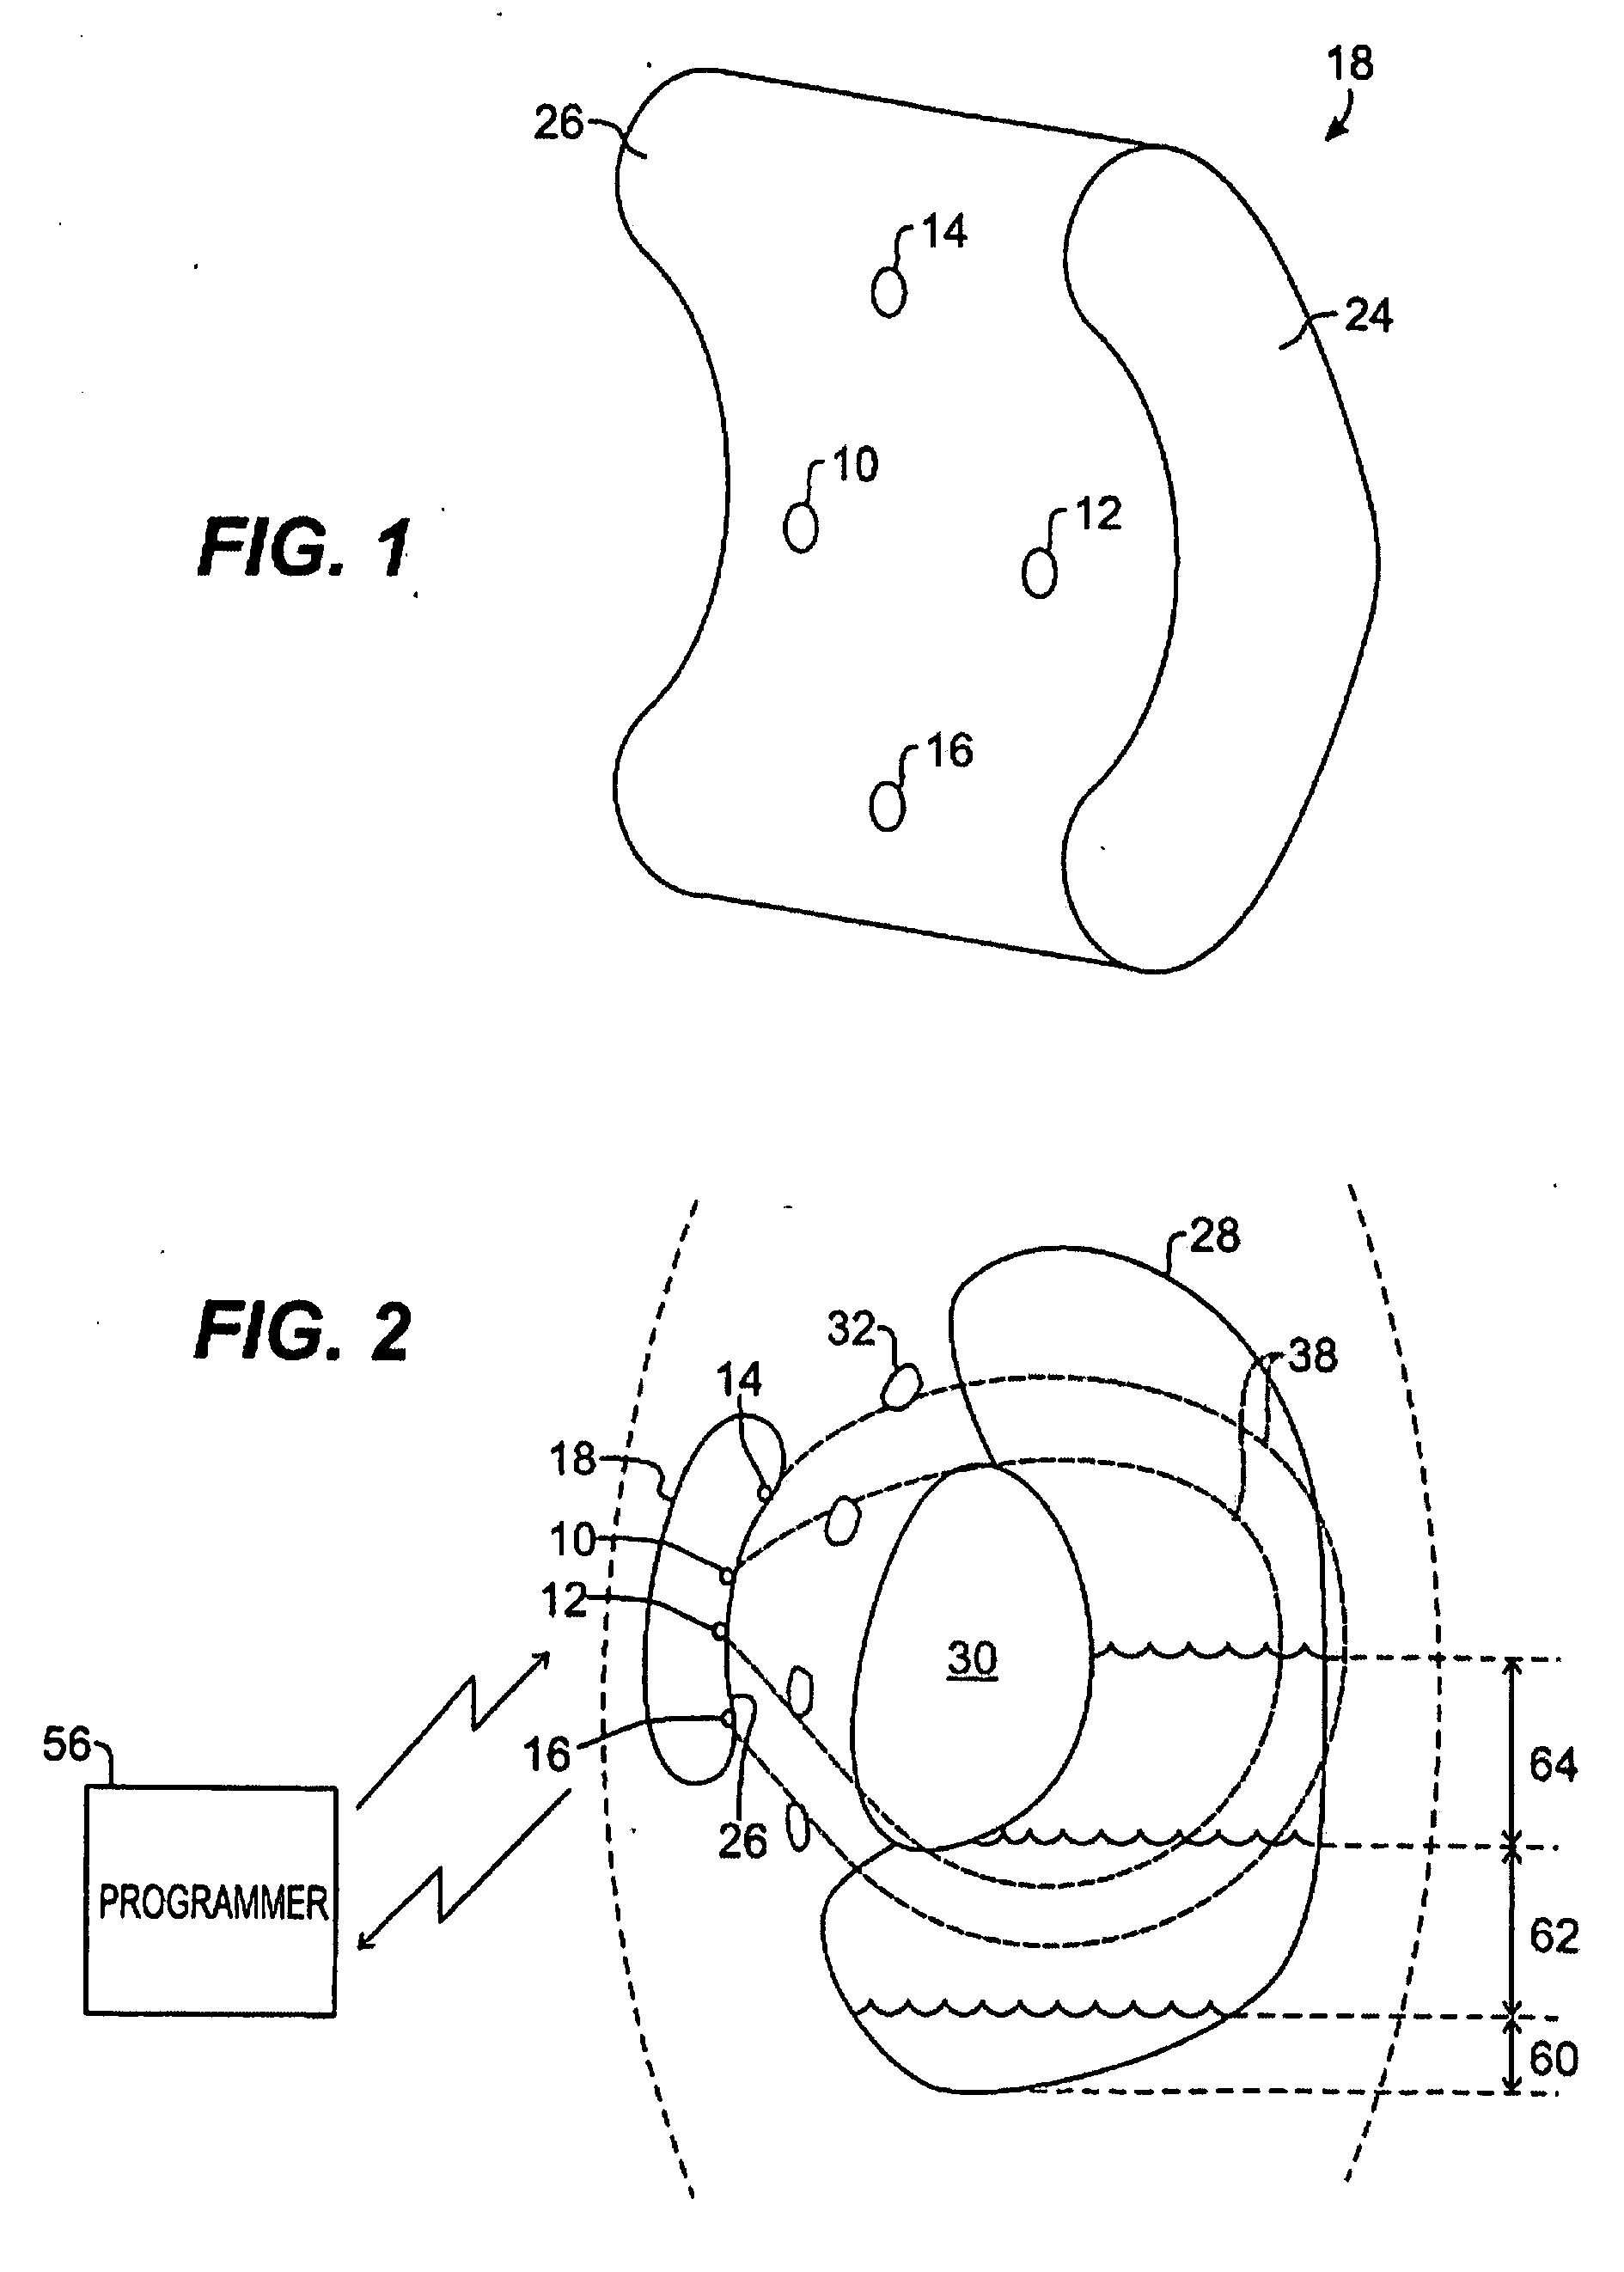 Remote Control of Implantable Device Through Medical Implant Communication Service Band